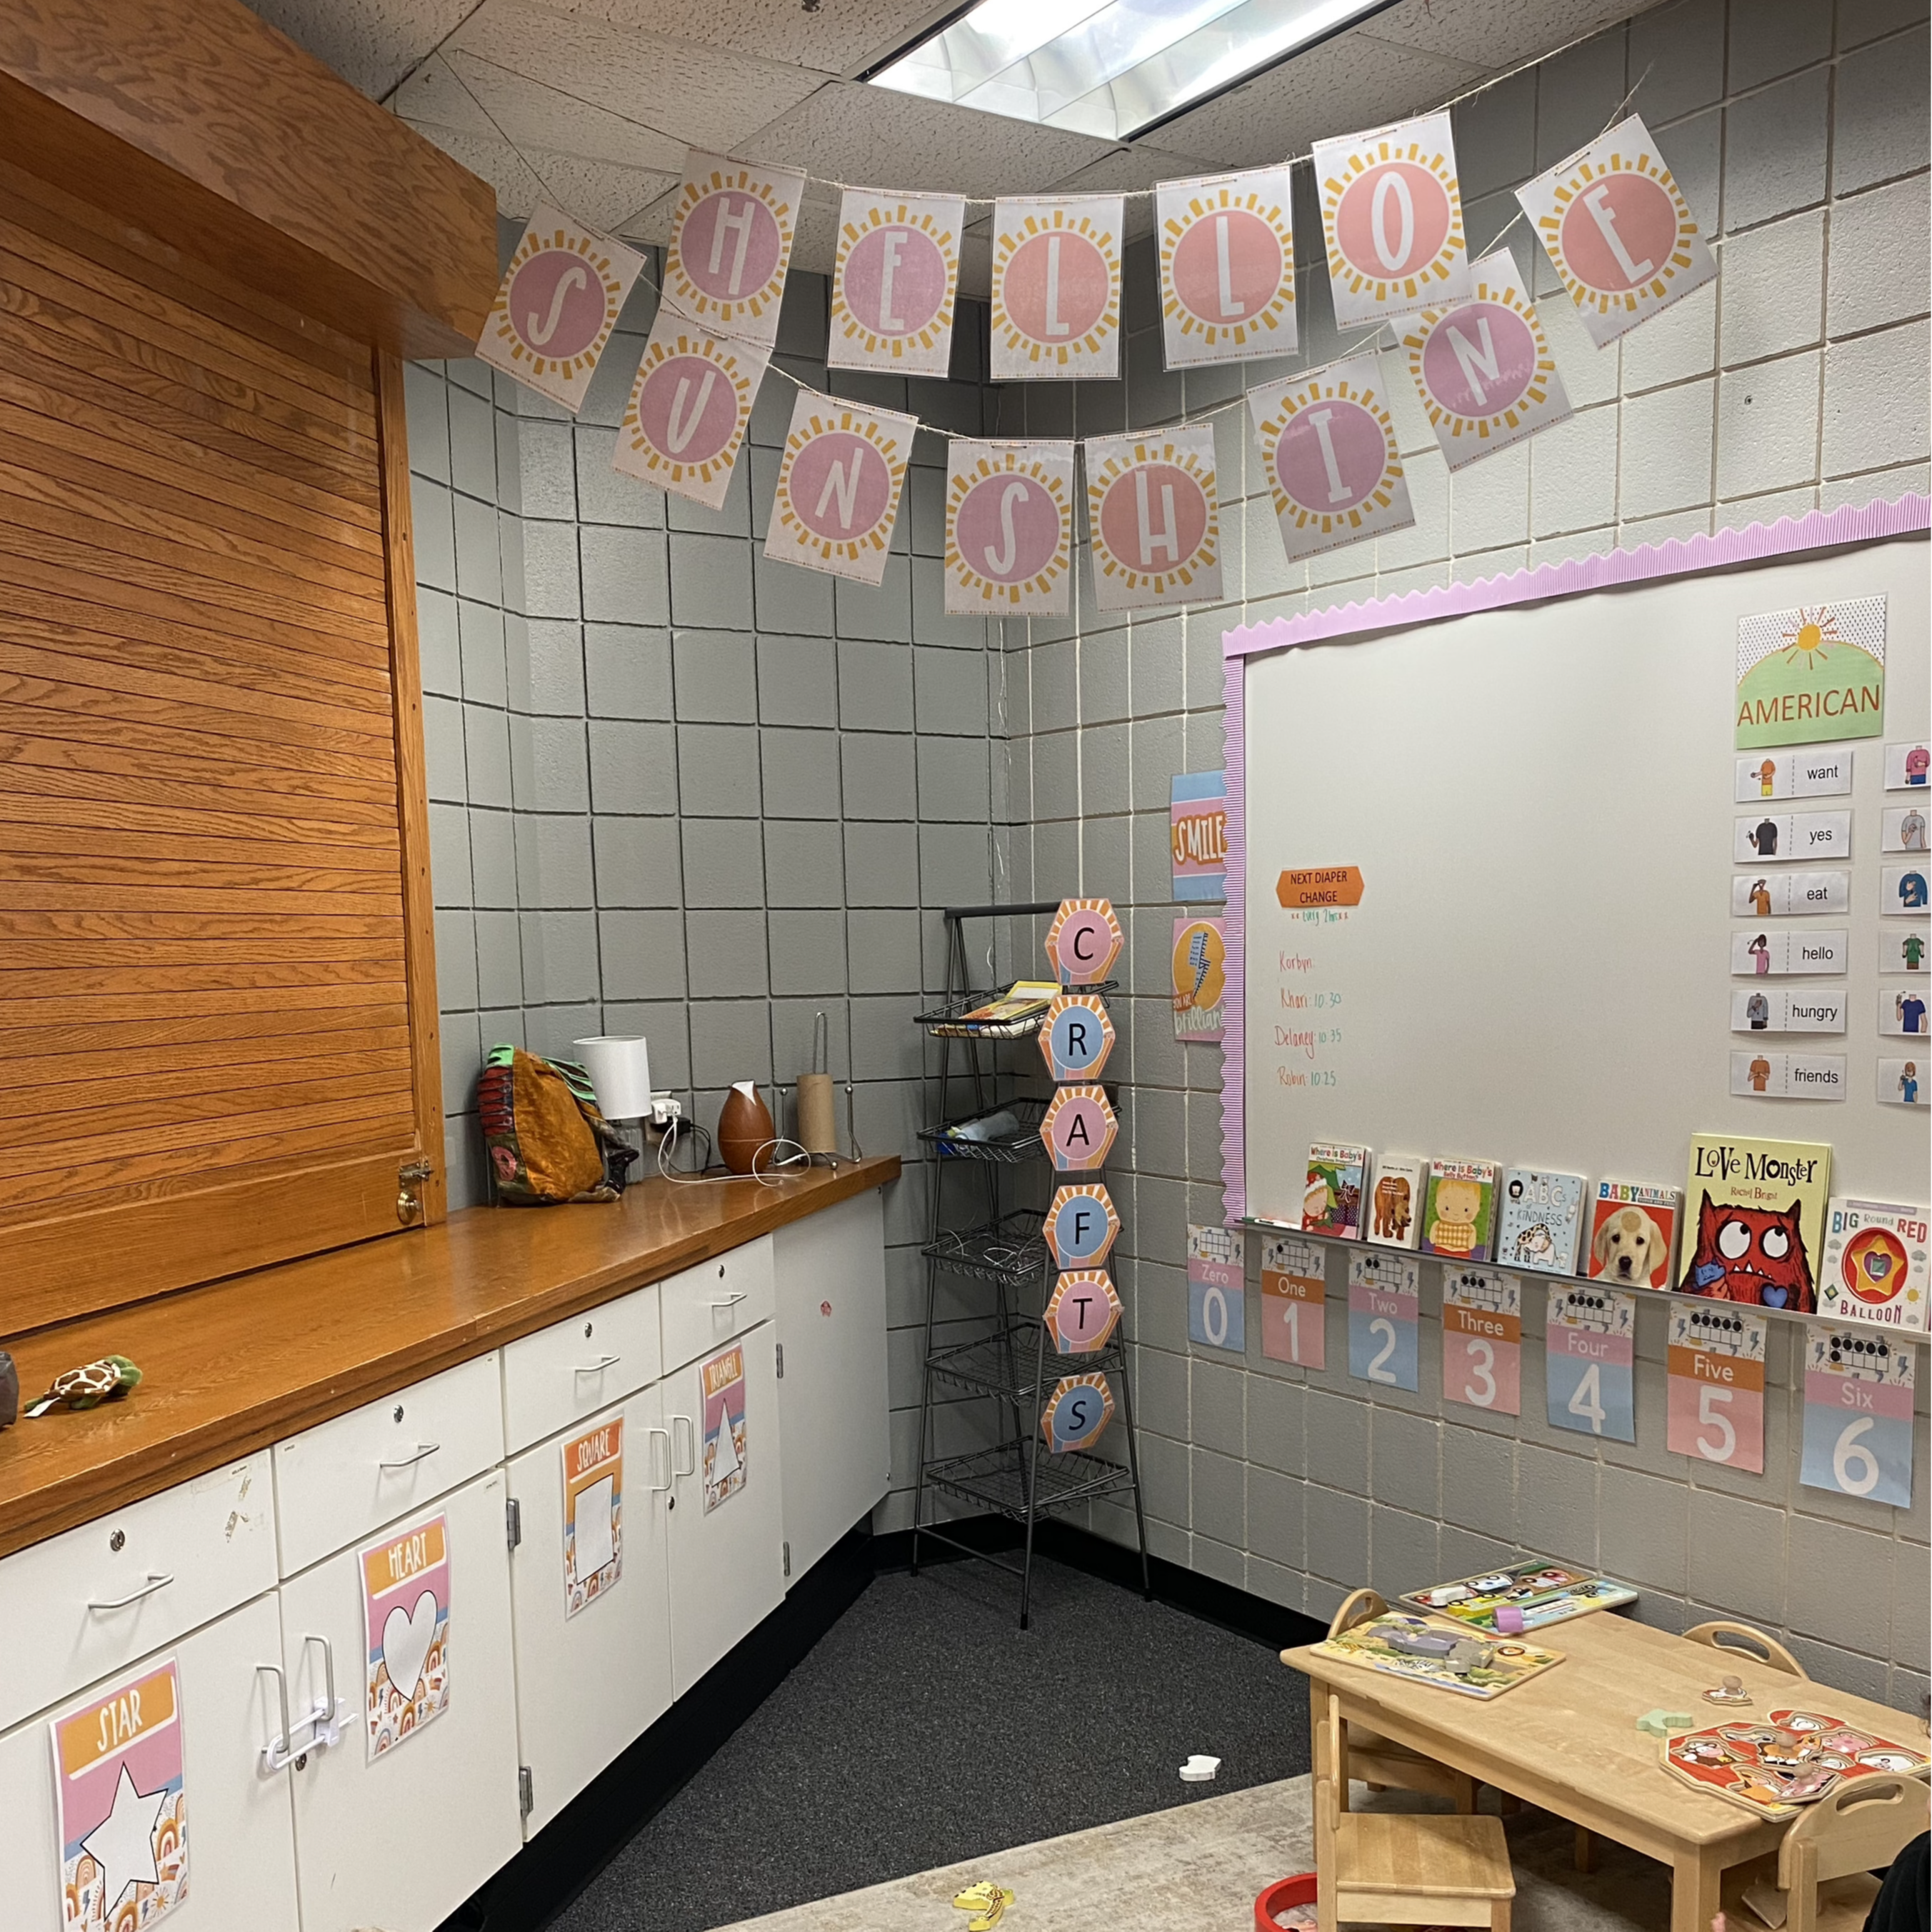 toddler classroom with "hello sunshine" banner across the ceiling and books and numbers set up on the white board